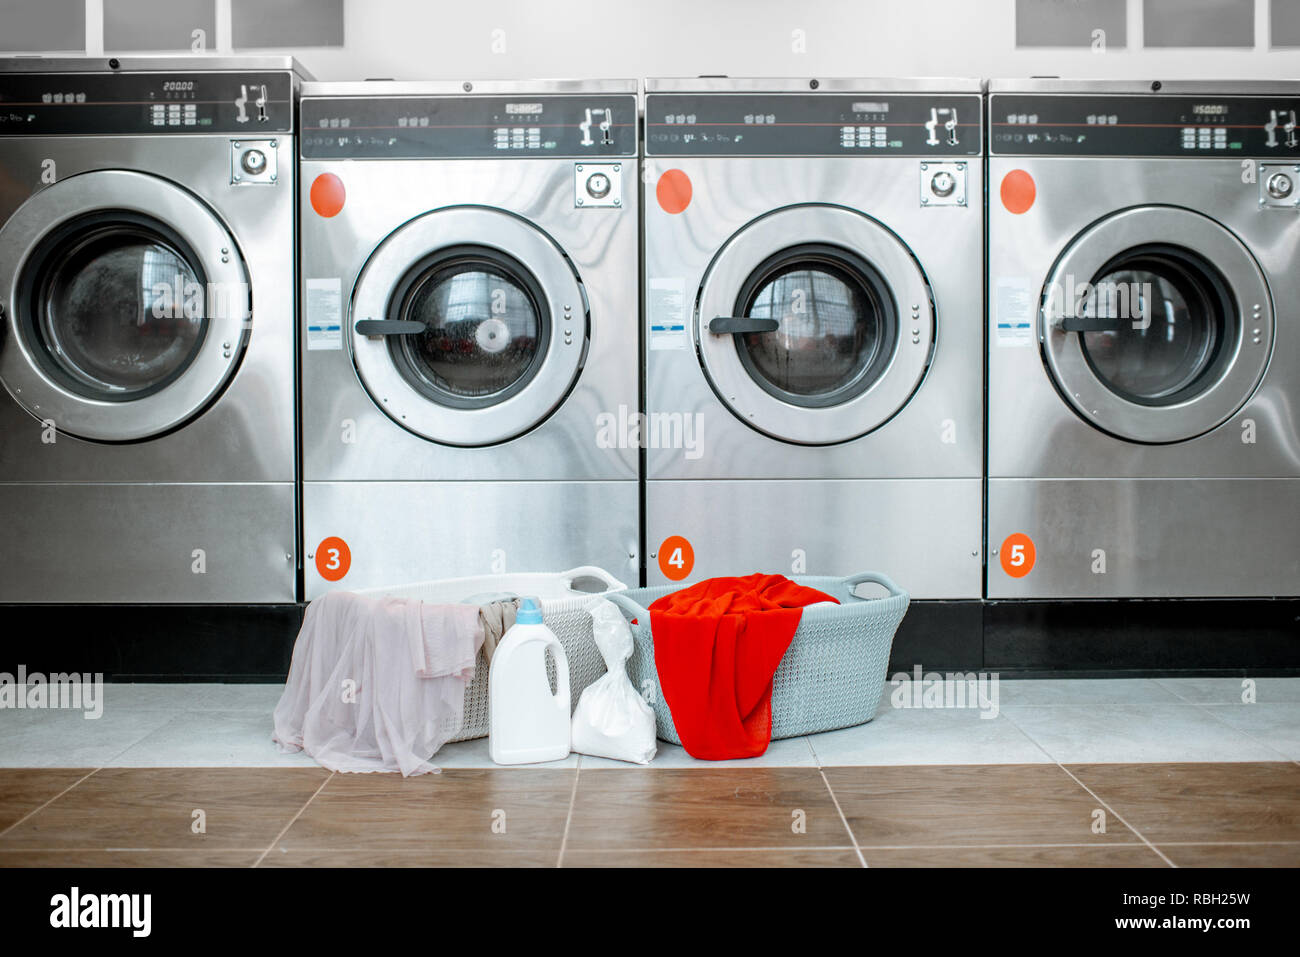 Professional washing machines with baskets full of clothes at the self-service laundry Stock Photo